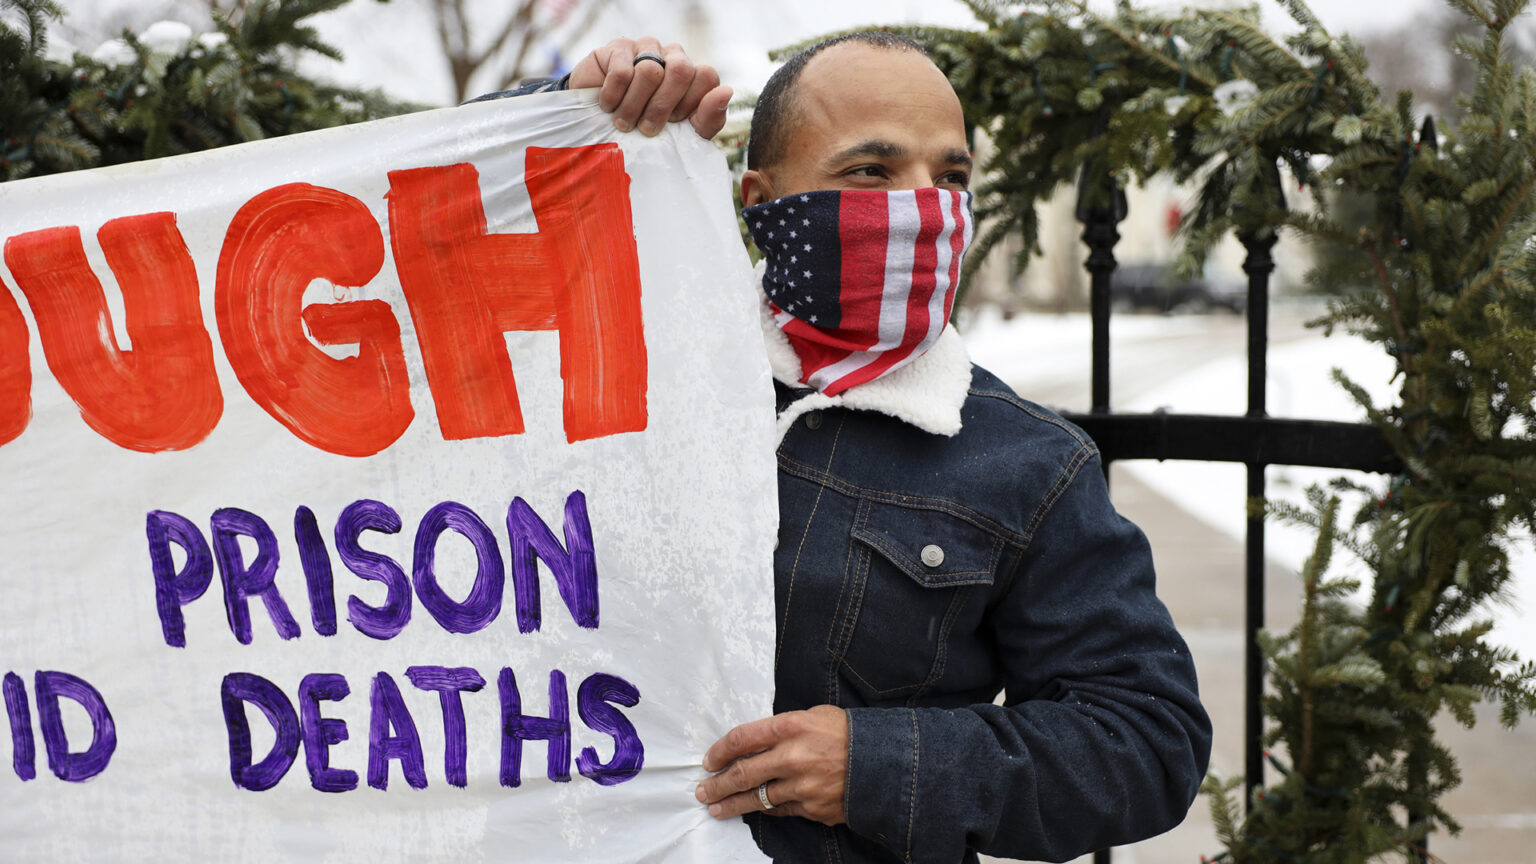 Ramiah Whiteside wears an American flag mask and holds a protest sign in front of a wrought iron fence.